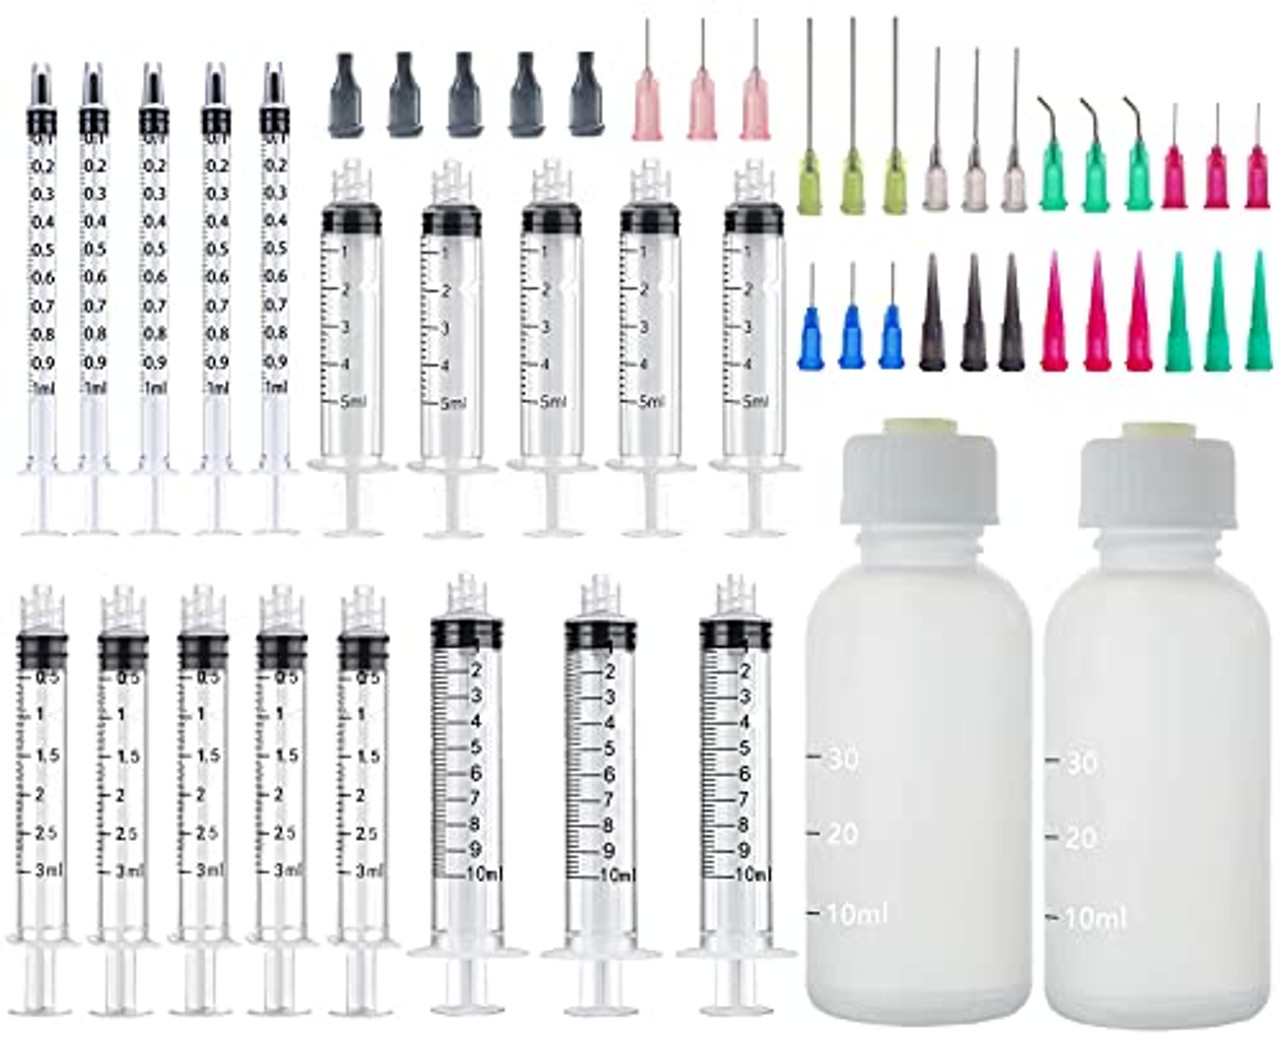 Precision Applications of Glue, 3ml 5ml Syringes and Blunt Tip Needles(14  15 16 18 19 20 21 22 23 25 Ga), for Liquid Measuring, Craft Paint, Epoxy  Resin, Oil or Adhesives Applicator